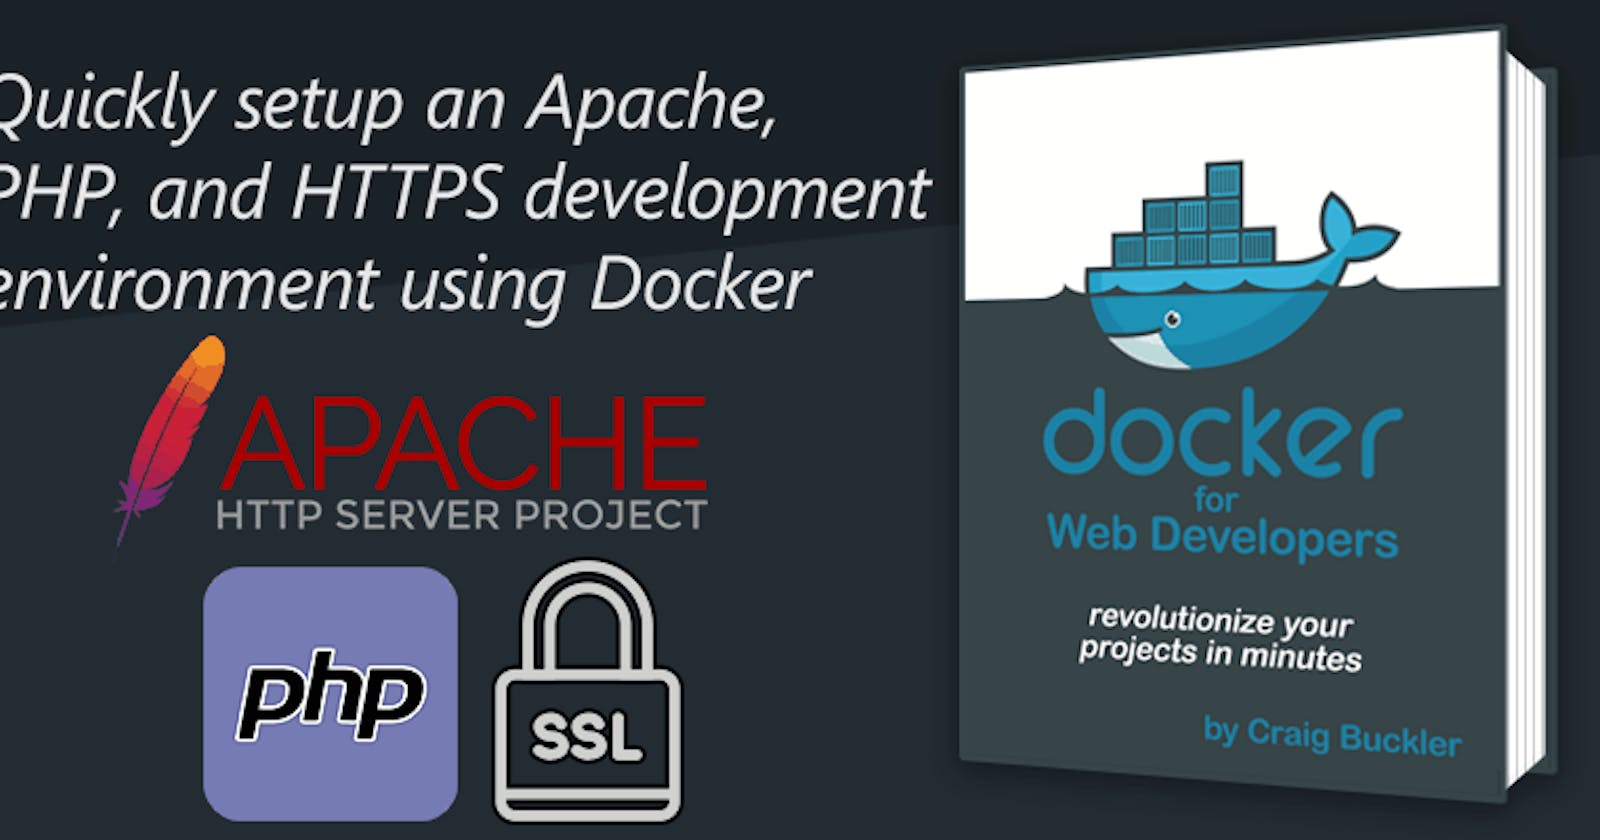 How to setup an Apache, PHP, and HTTPS development environment with Docker